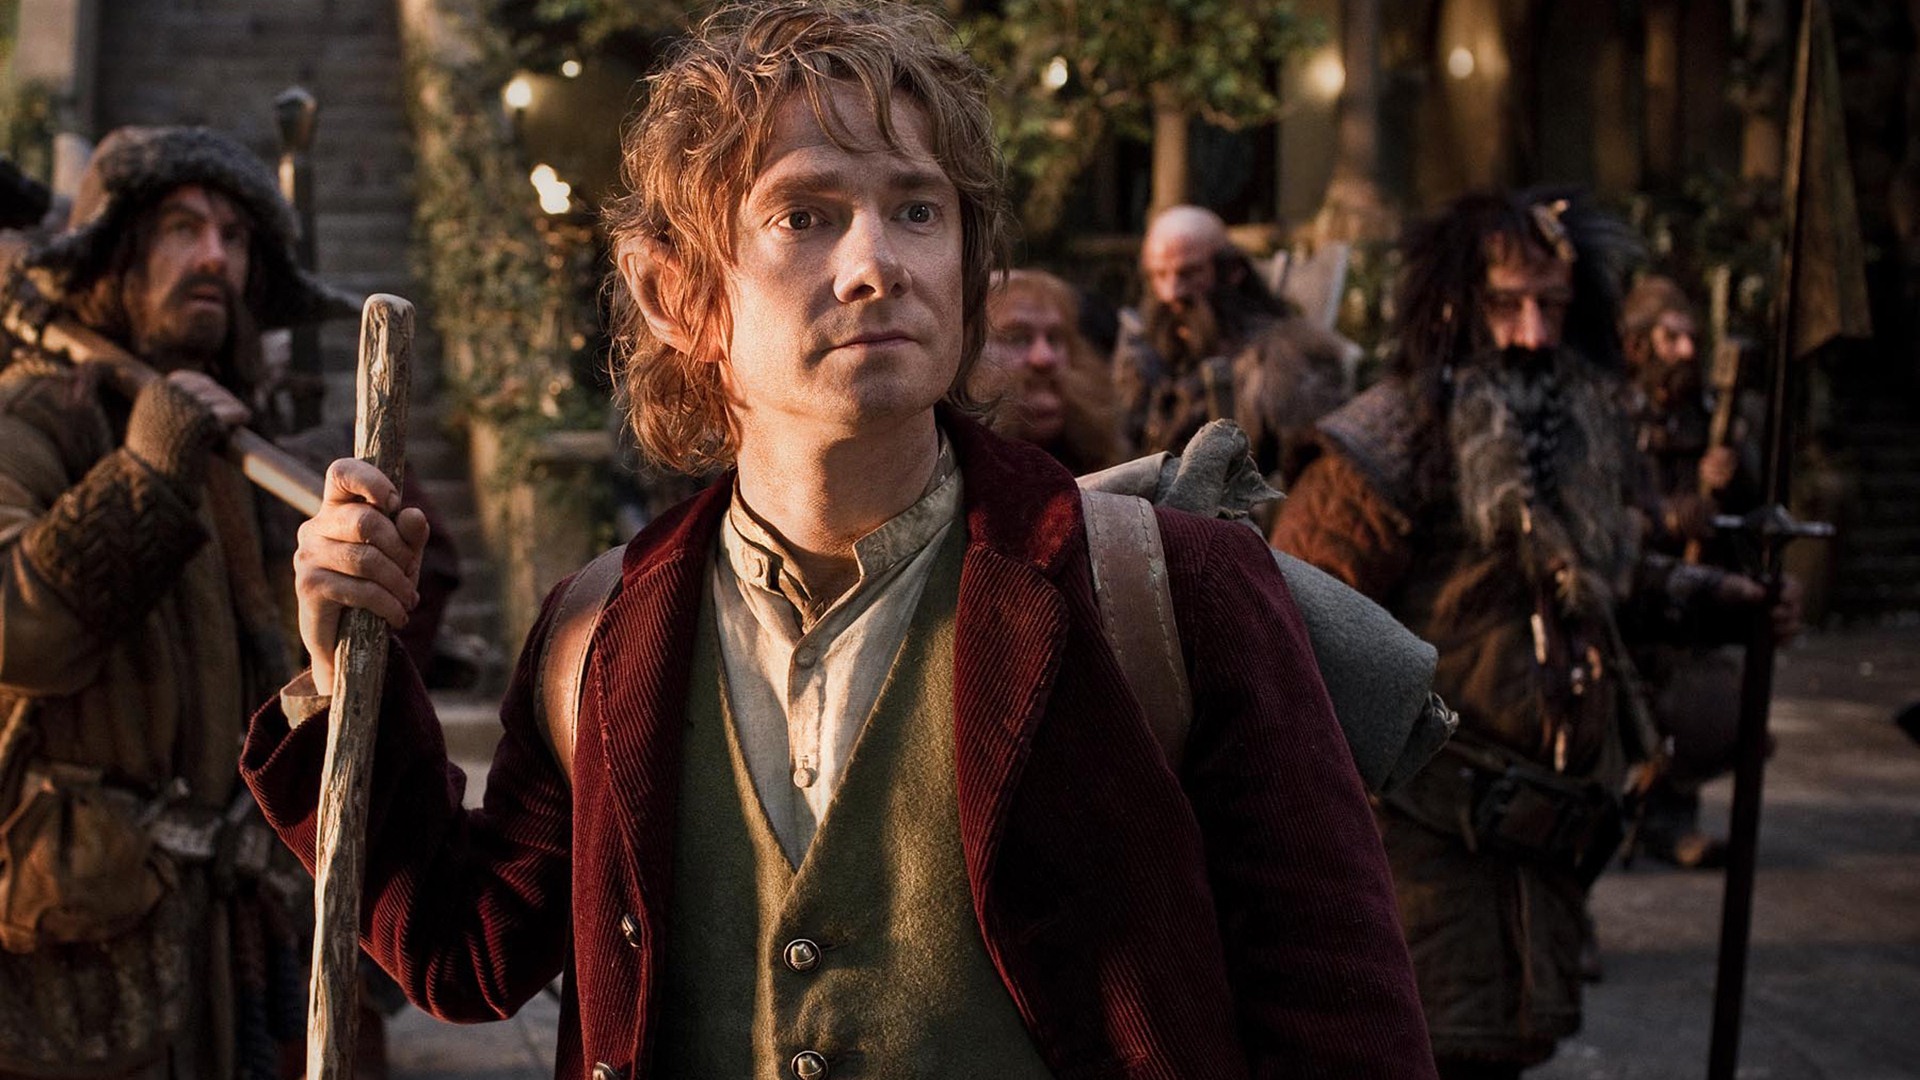 The Hobbit: An Unexpected Journey HD Wallpapers #3 - 1920x1080